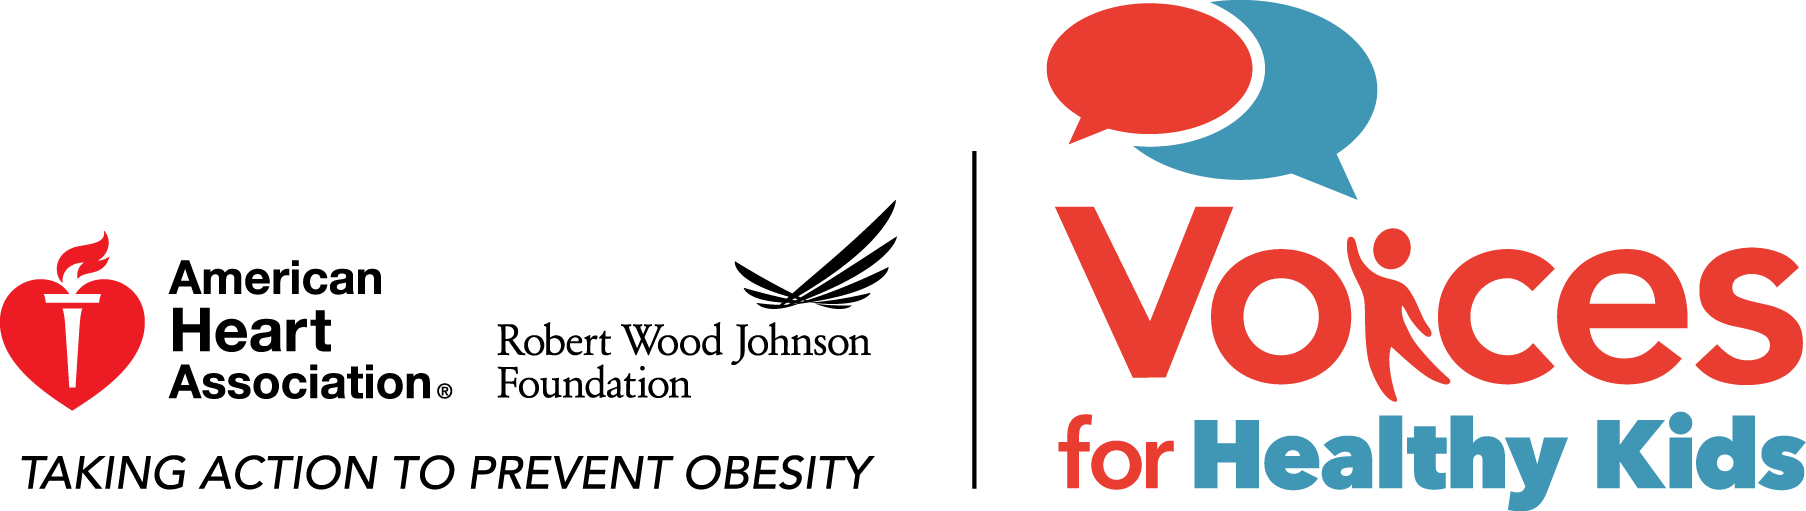 Voices For Alabama's Children And Adeca Announce Funding - Voices For Healthy Kids Logo (1806x511)